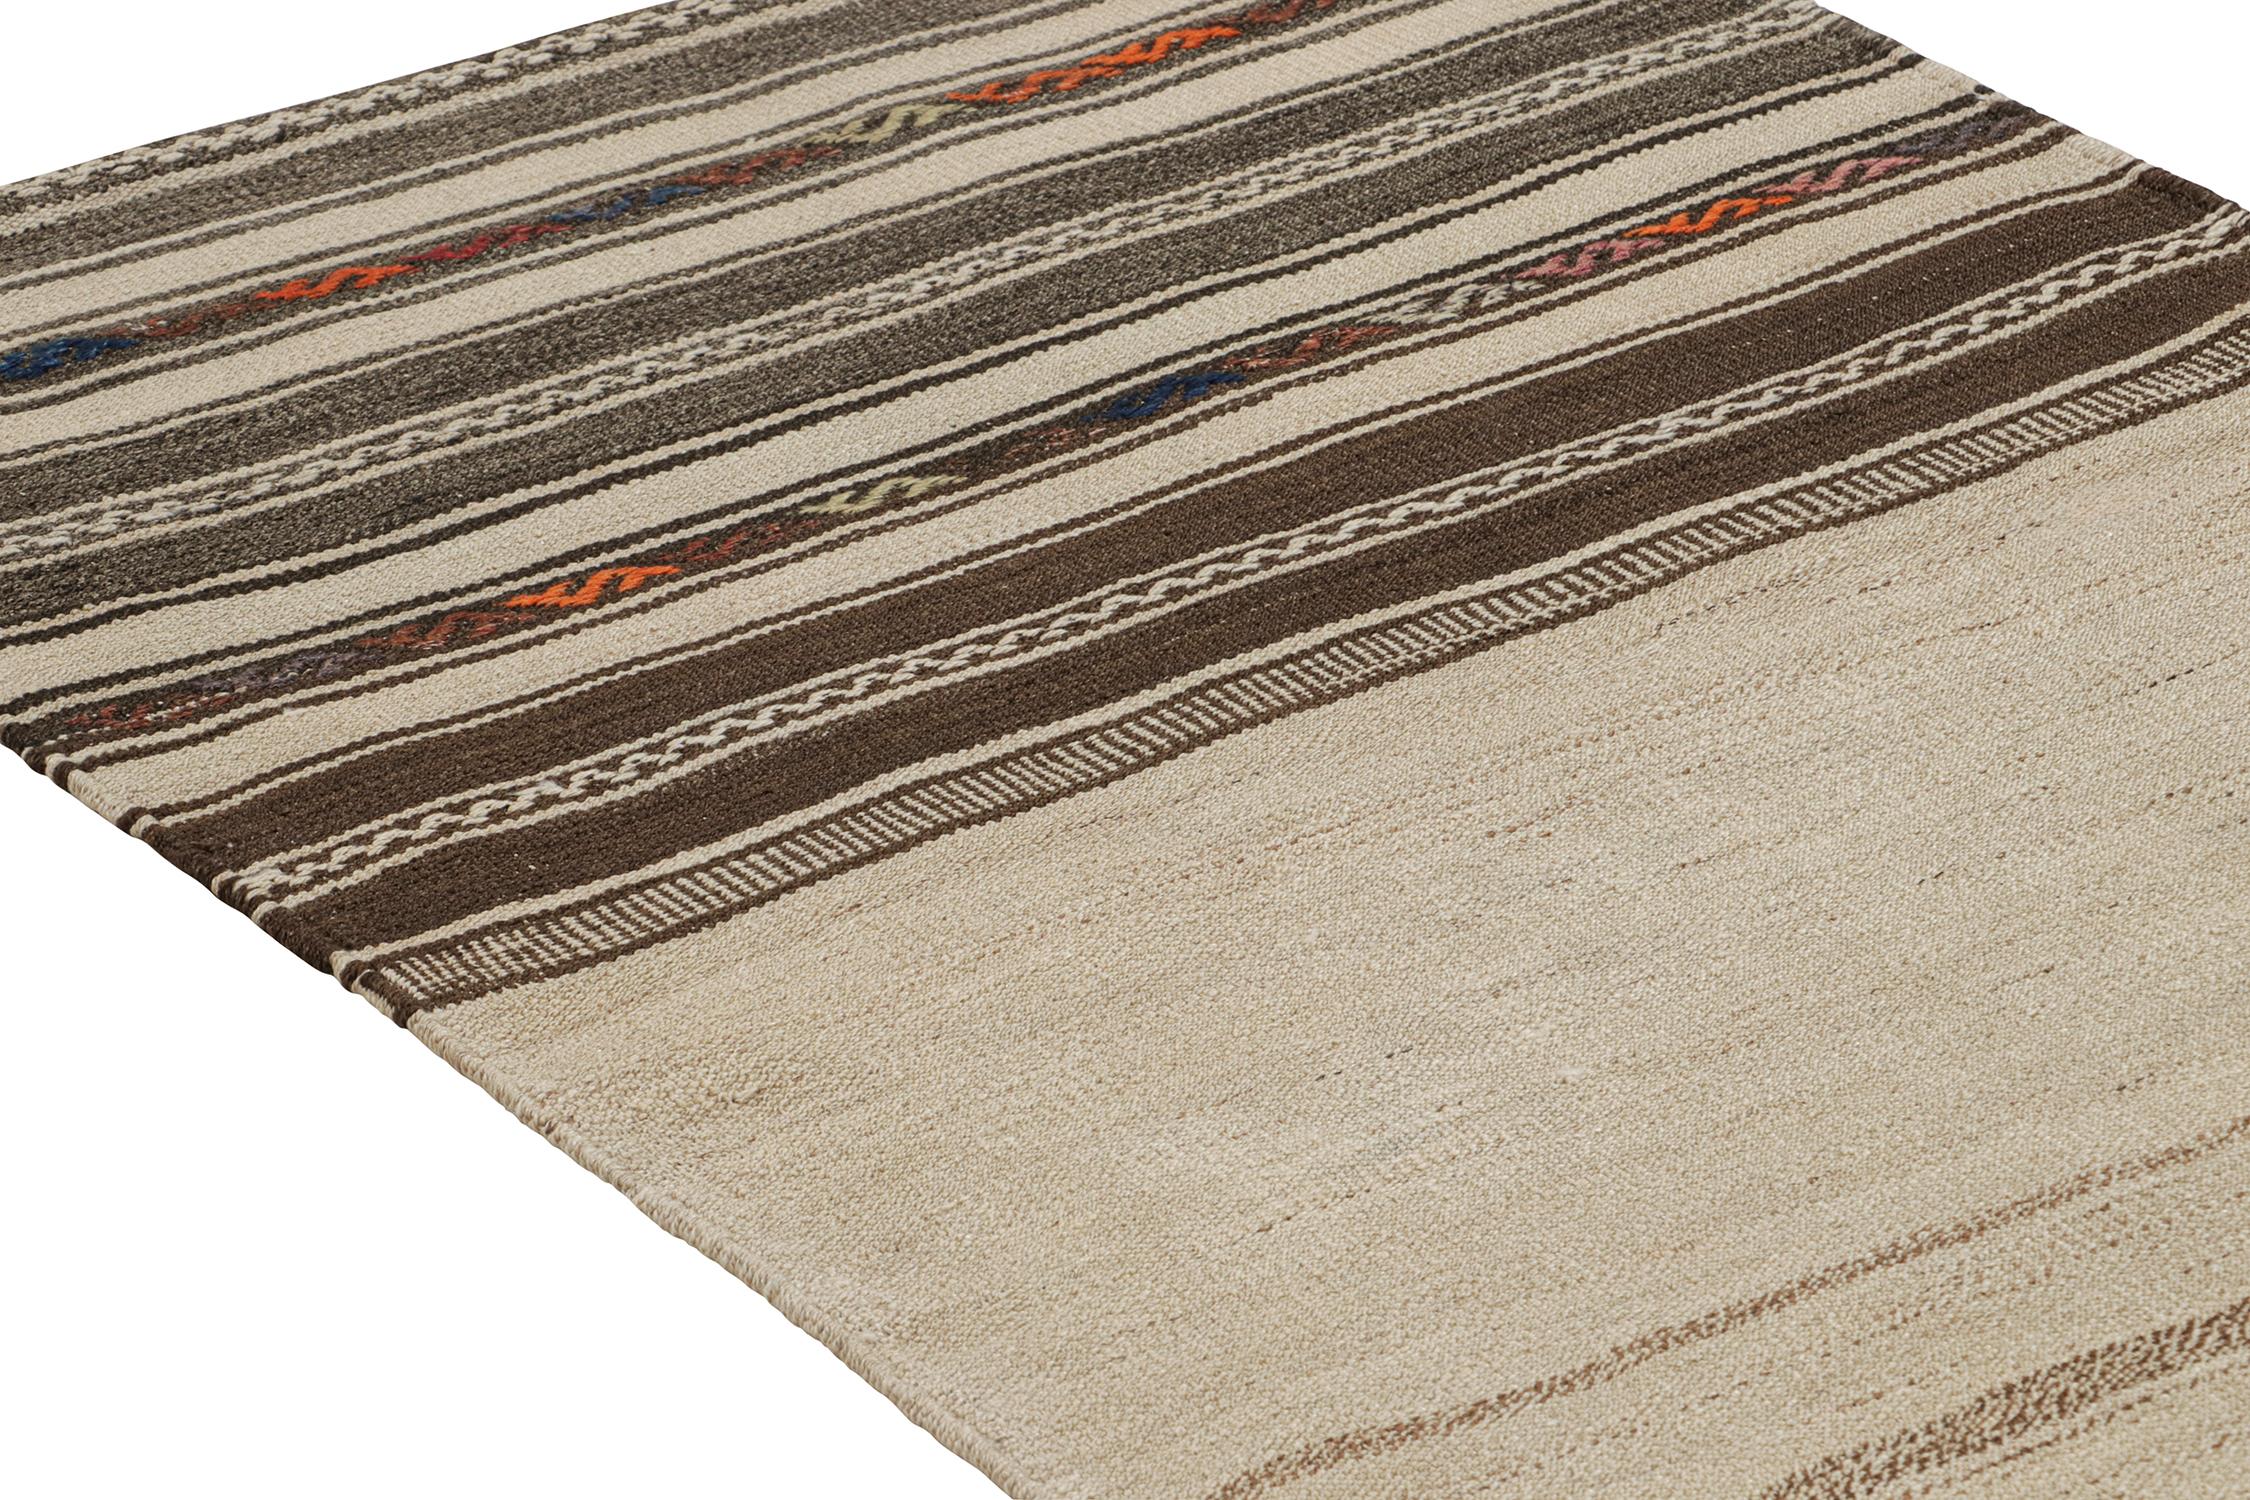 Vintage Persian Kilim Runner in Greige with Brown Stripes by Rug & Kilim In Good Condition For Sale In Long Island City, NY